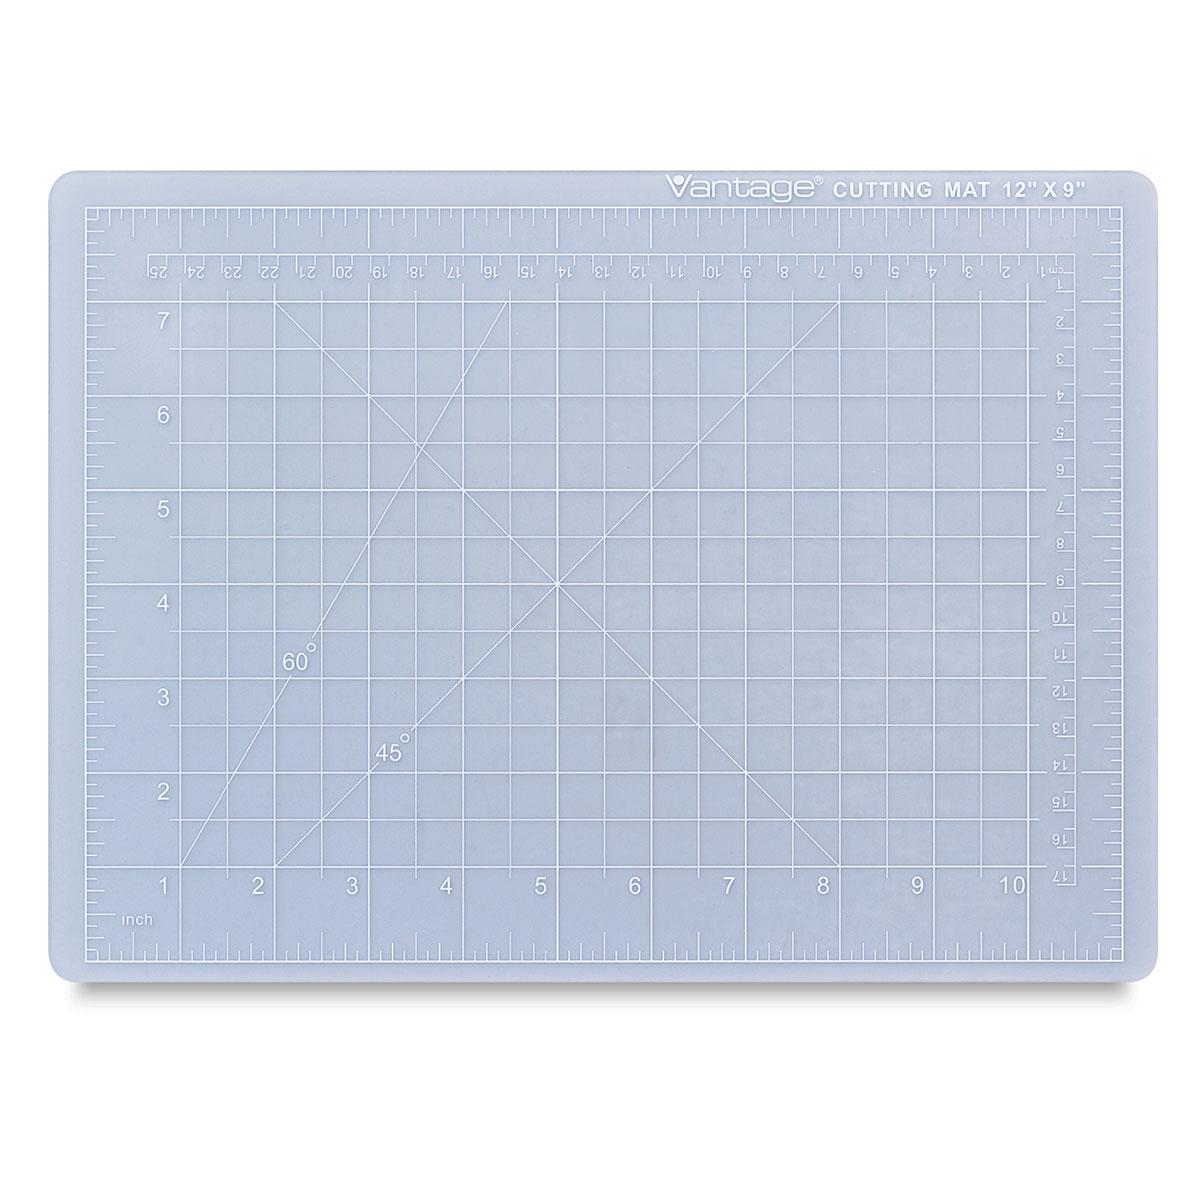  Dahle Vantage 10670 Self-Healing Cutting Mat, 9x12, 1/2  Grid, 5 Layers for Max Healing, Perfect for Crafts & Sewing, Black : Craft Cutting  Mats : Arts, Crafts & Sewing